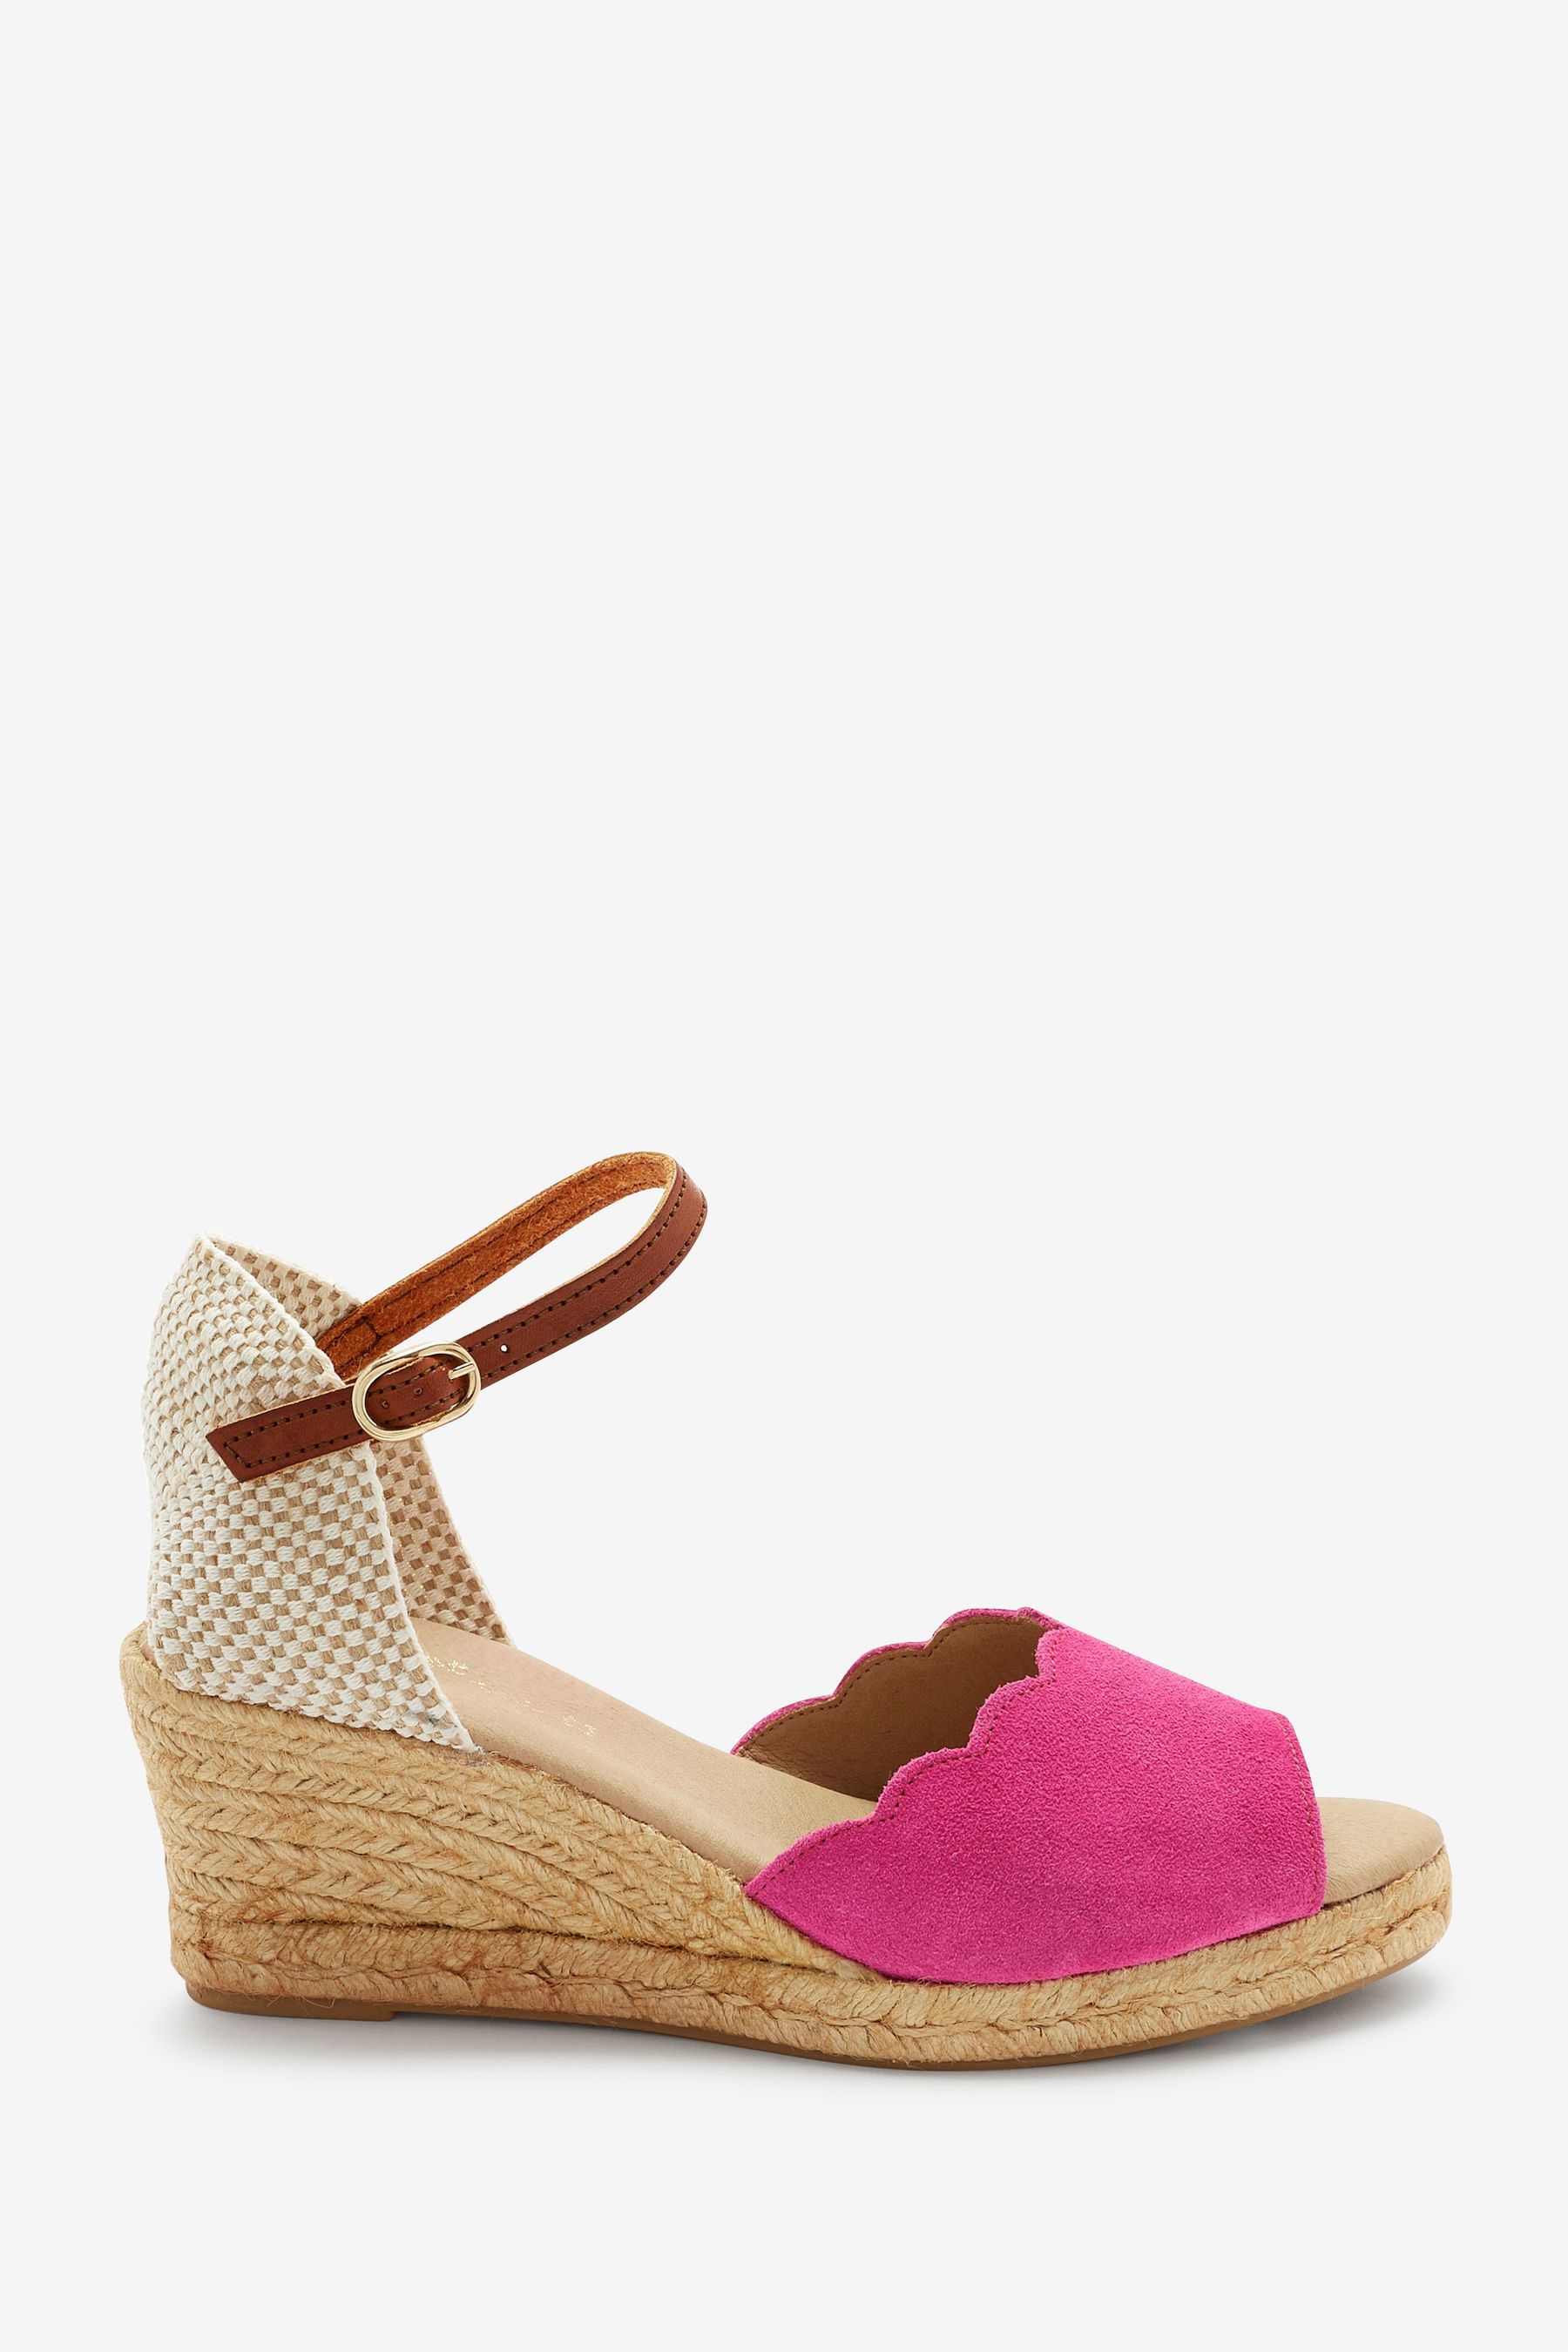 Buy Pink Forever Comfort® Scalloped Peep Toe Wedges From The Next Uk Online Shop 9415